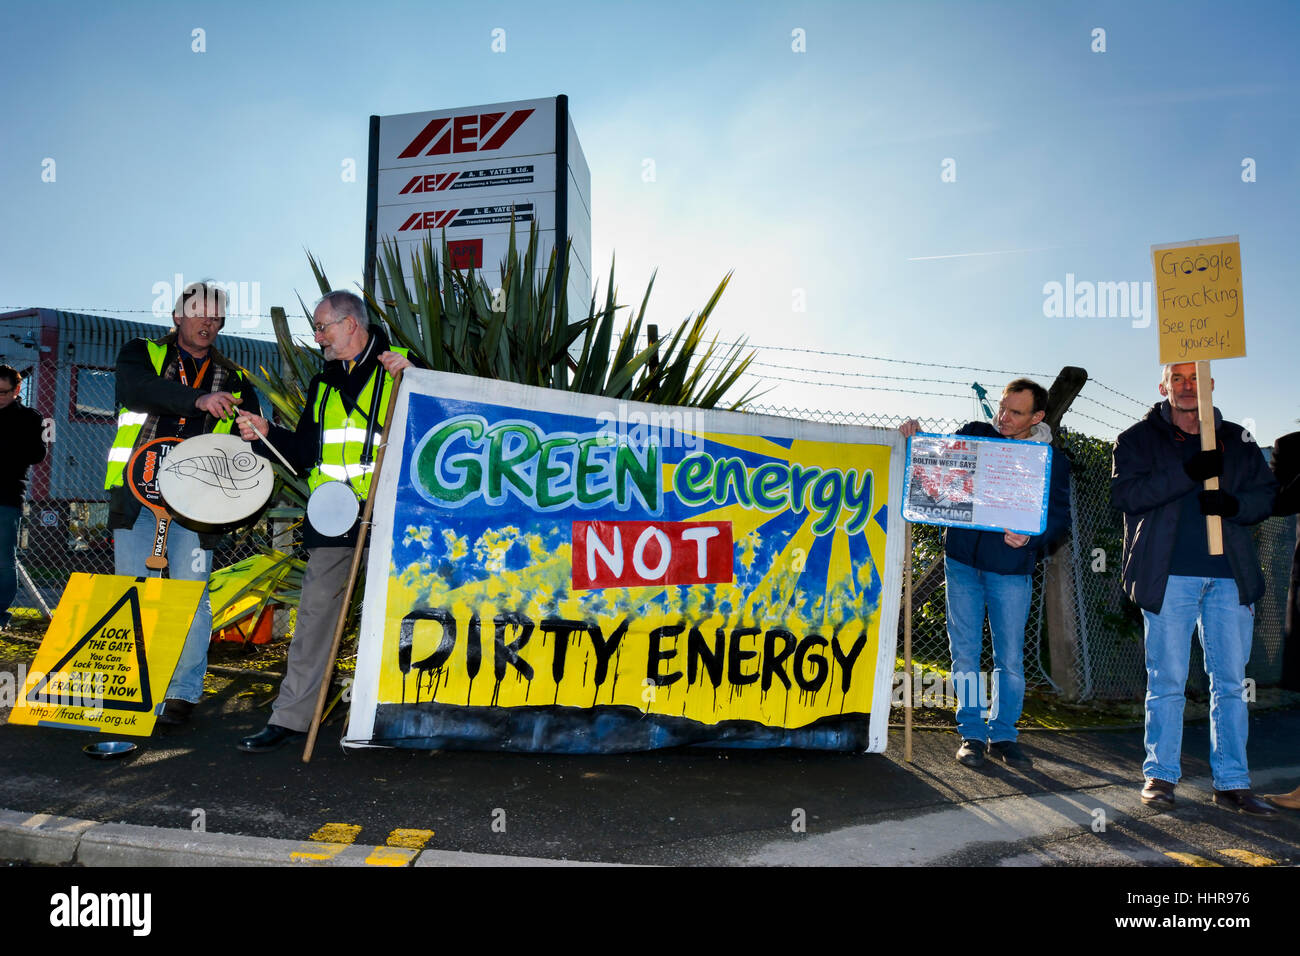 Bolton Lancashire, UK. 20th January 2017: A small group of protesters blocked the entrance to A E Yates business premises near the Bolton Wanderers Football stadium today demanding they cease delivering aggregates to the Cuadrilla shalegas site on Preston New Road in Little Plumpton near Blackpool and that they have no further involvement with fracking companies. The aggregate is used to lay foundations for the drillpad and also to allow the heavy supply vehicles onsite without getting bogged down in the soft ground in the field. Credit: Dave Ellison/Alamy Live News Stock Photo